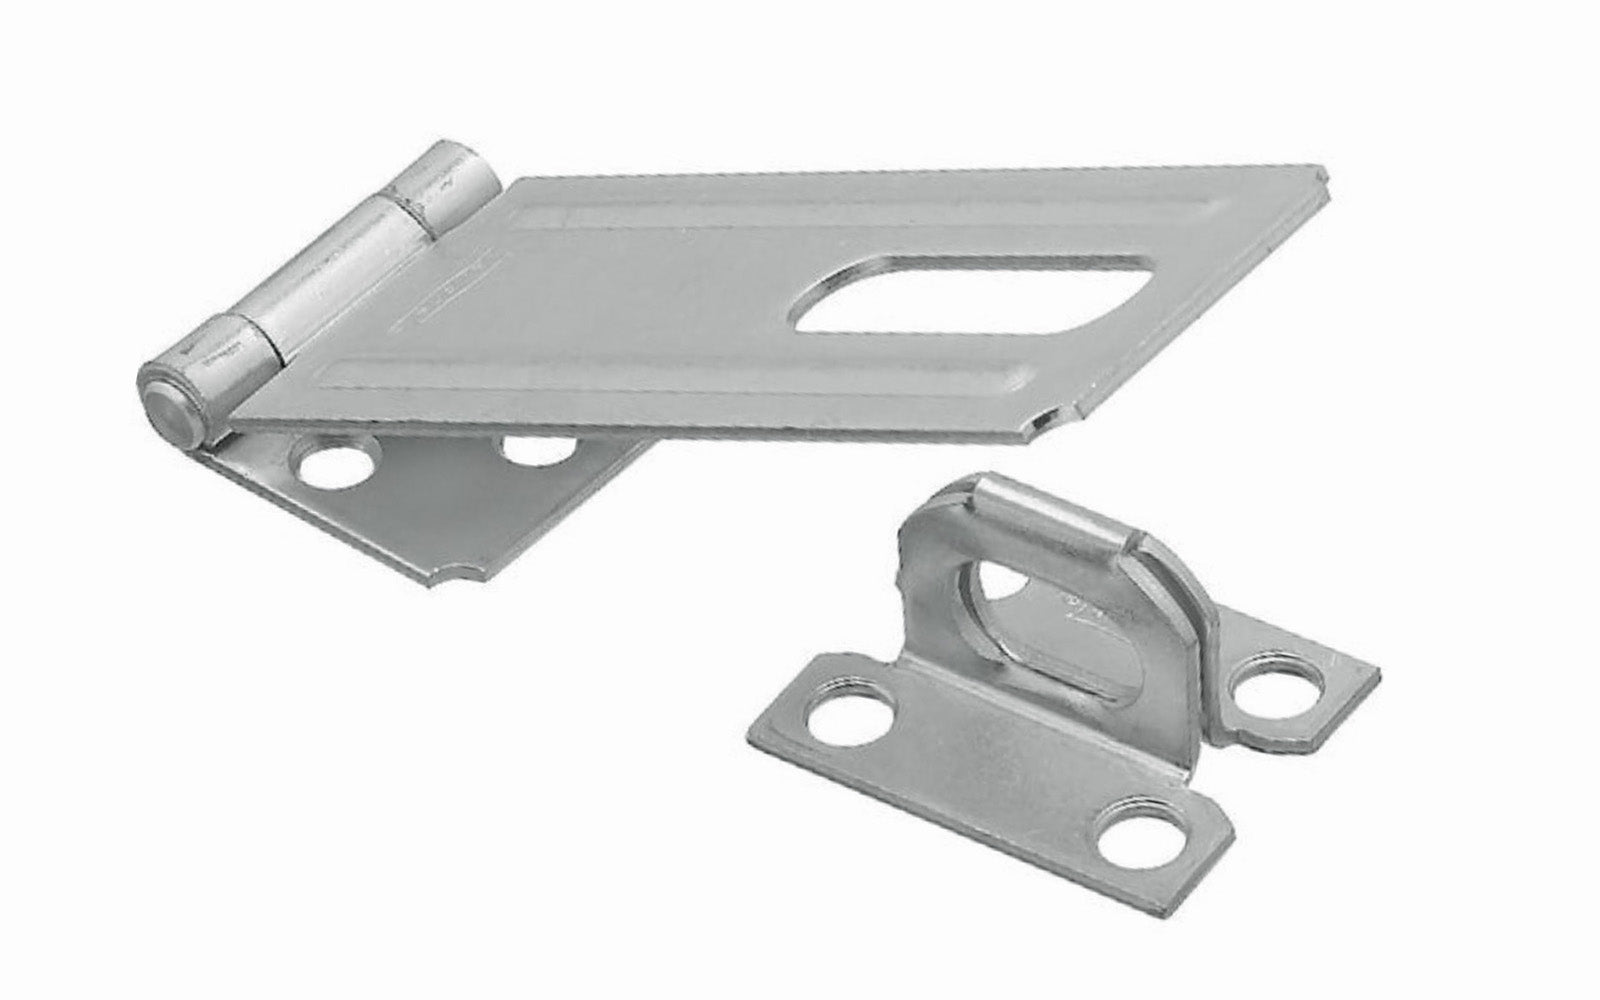 4-1/2" zinc-plated safety hasp is designed to secure a wide variety of cabinets, small doors, boxes, trunks, & more. For security, all screws are concealed when hasp is closed. Includes rigid, non-swivel staple. National Hardware Model N102-384. 038613102385. Plated to withstand weather conditions & prevent corrosion.